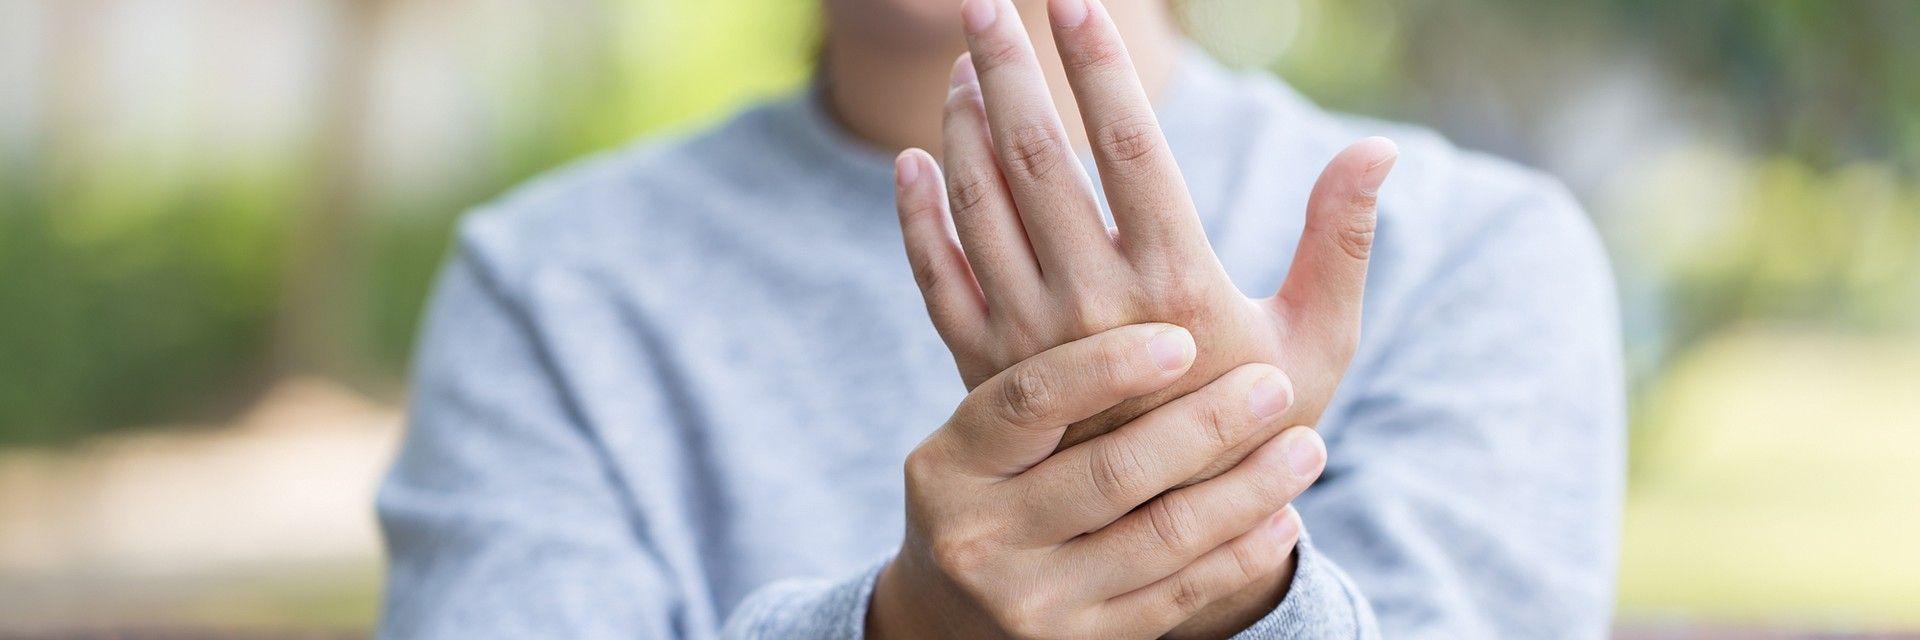 Joint Pain Series: How Do I Know If I Have Arthritis?